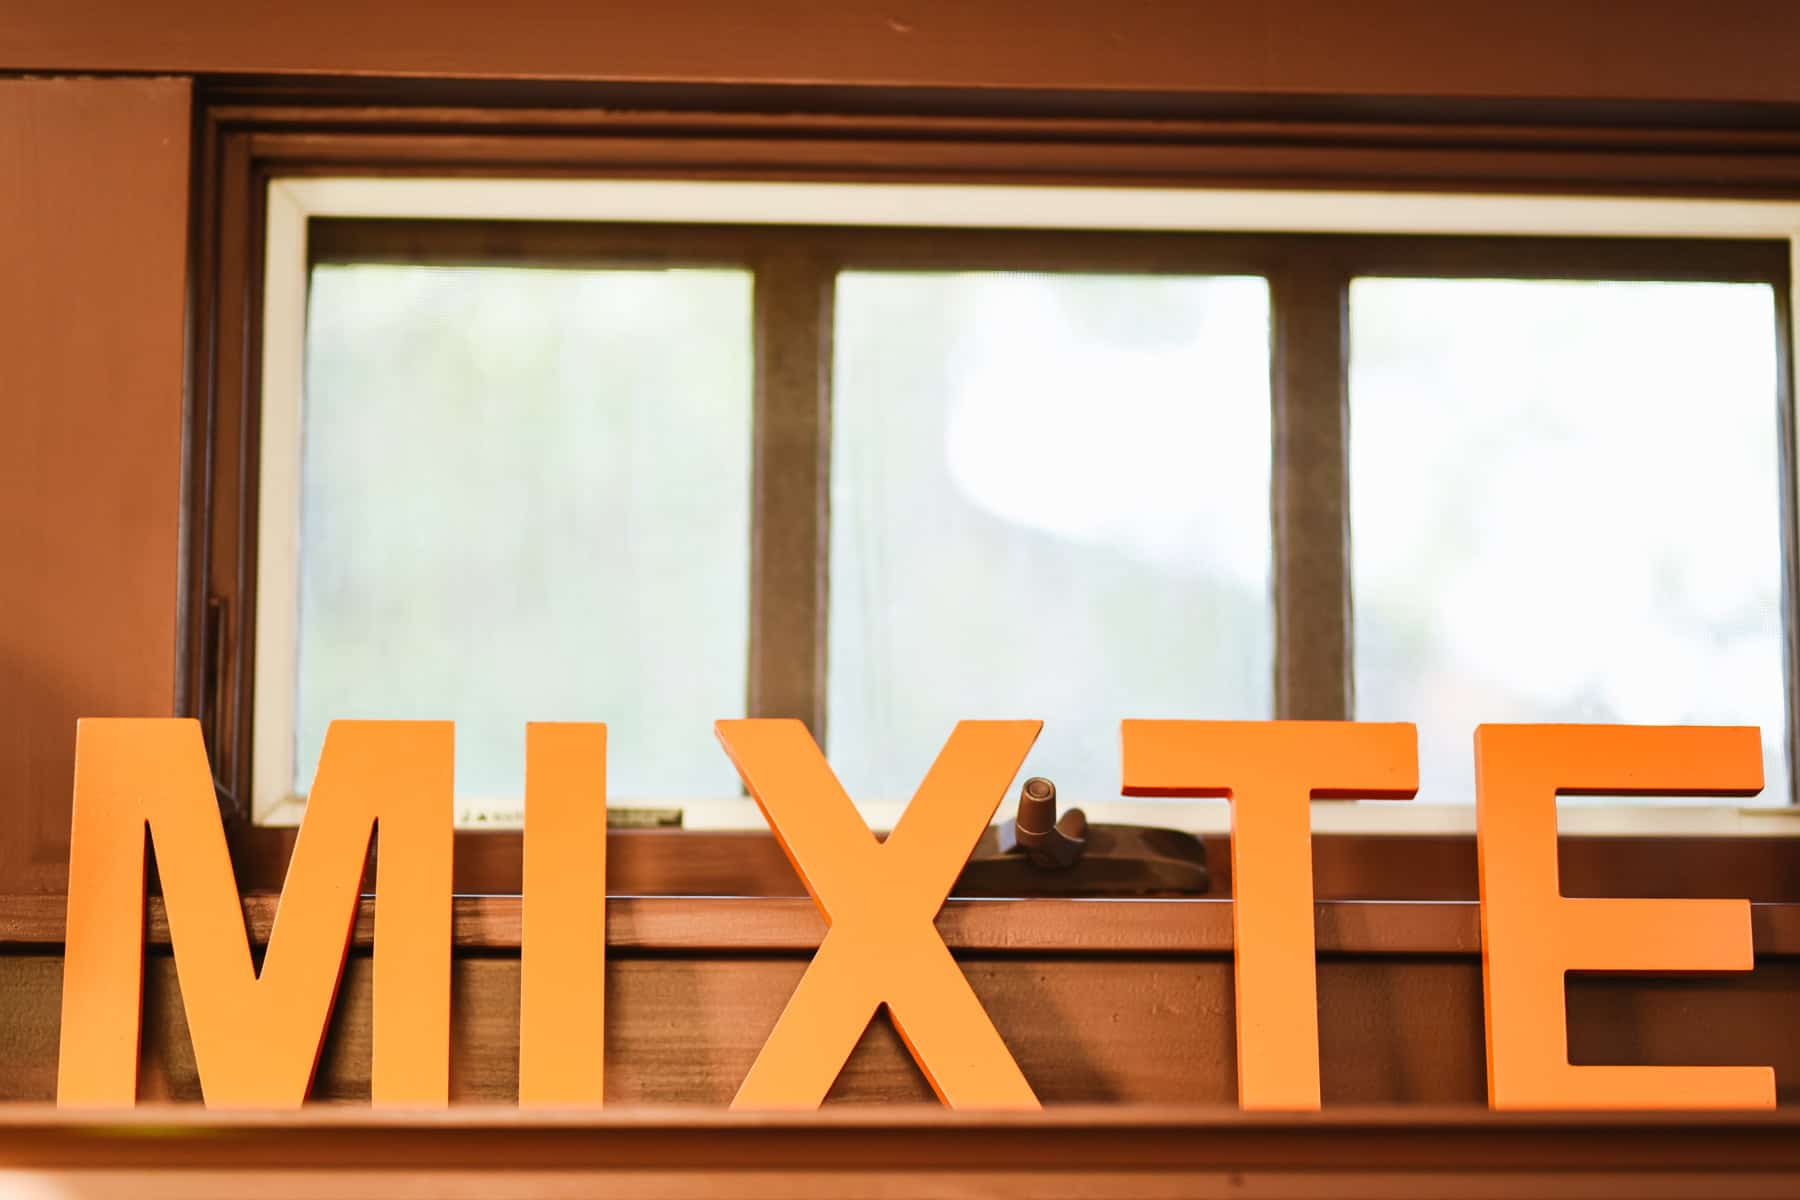 Decorative wooden letters spelling "Mixte" set in front of window